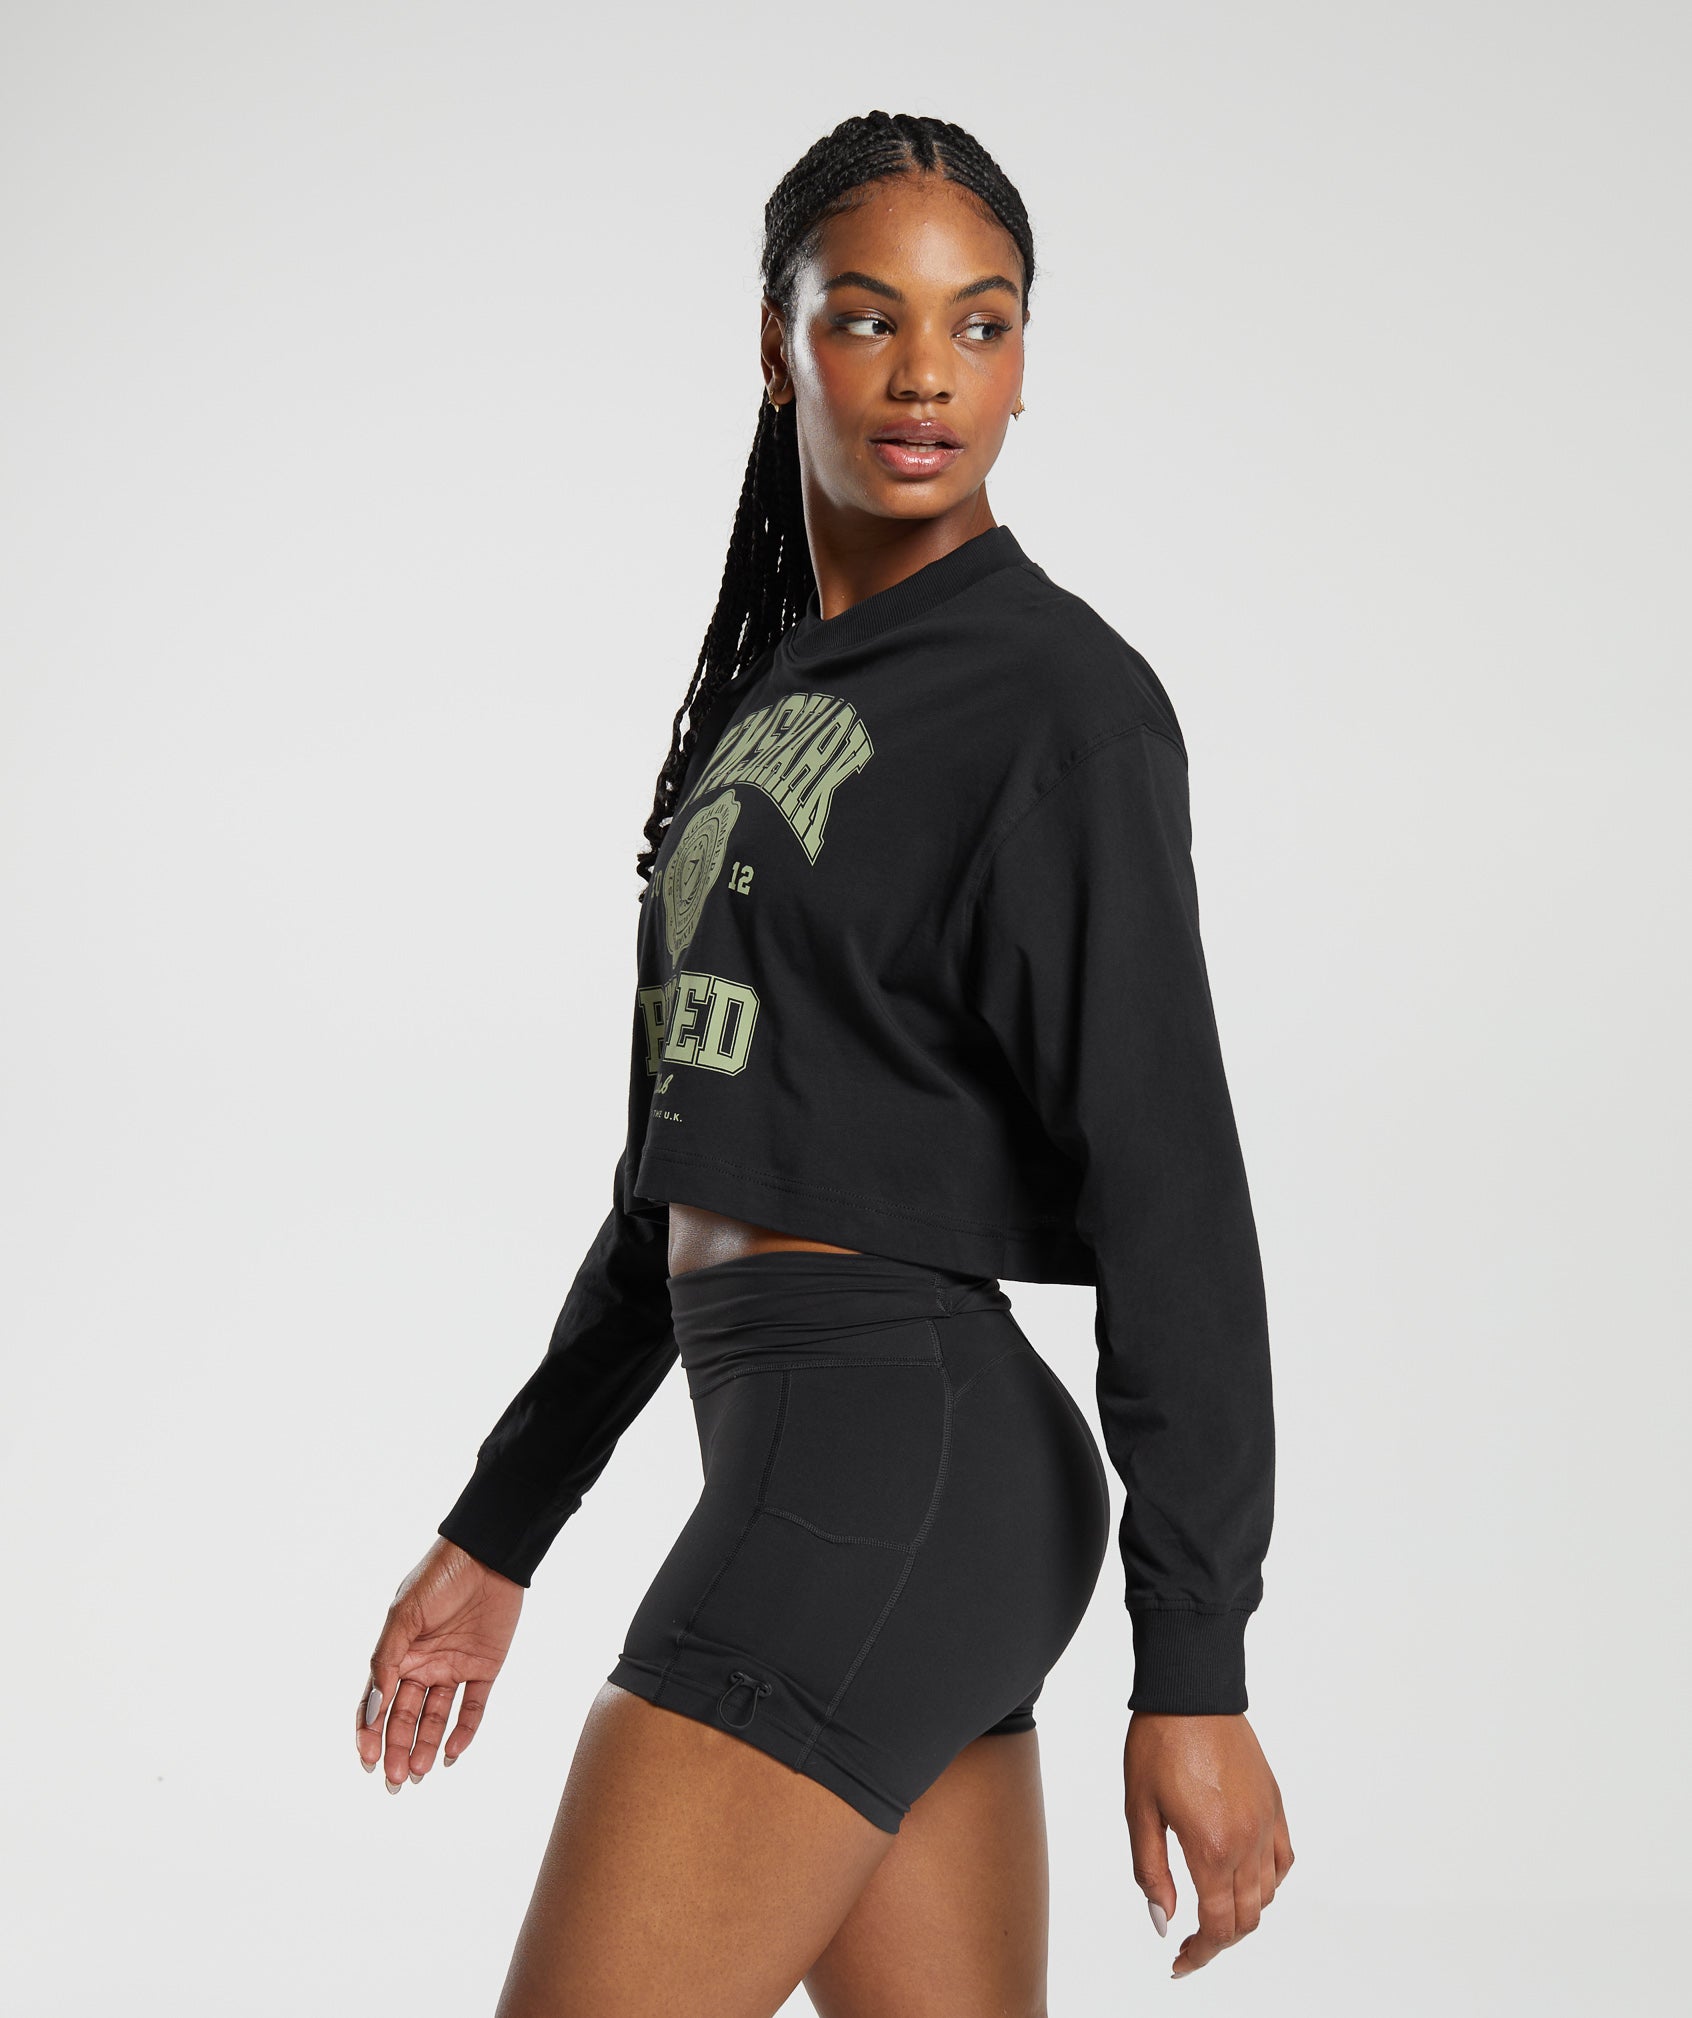 Phys Ed Graphic Long Sleeve T-Shirt in Black - view 3